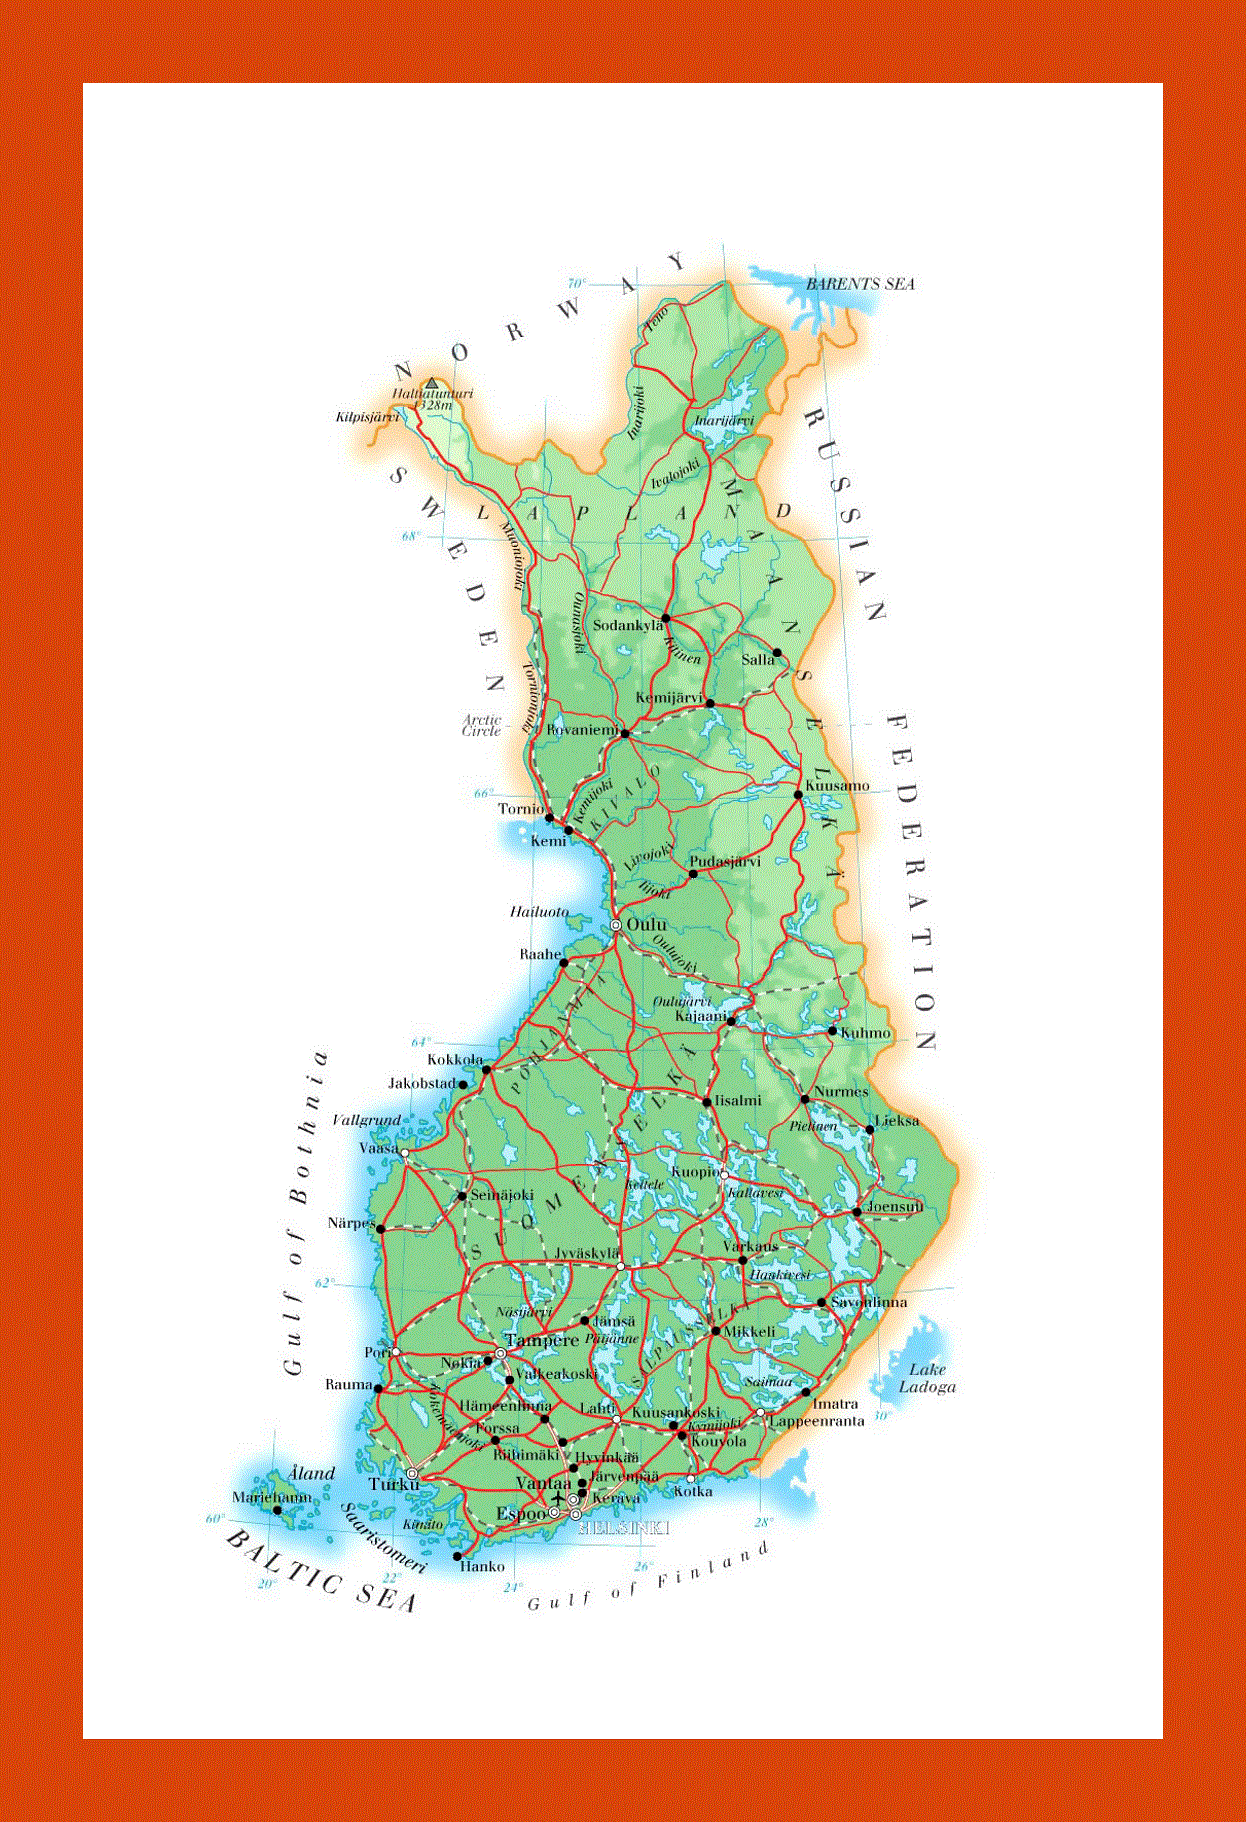 Elevation map of Finland